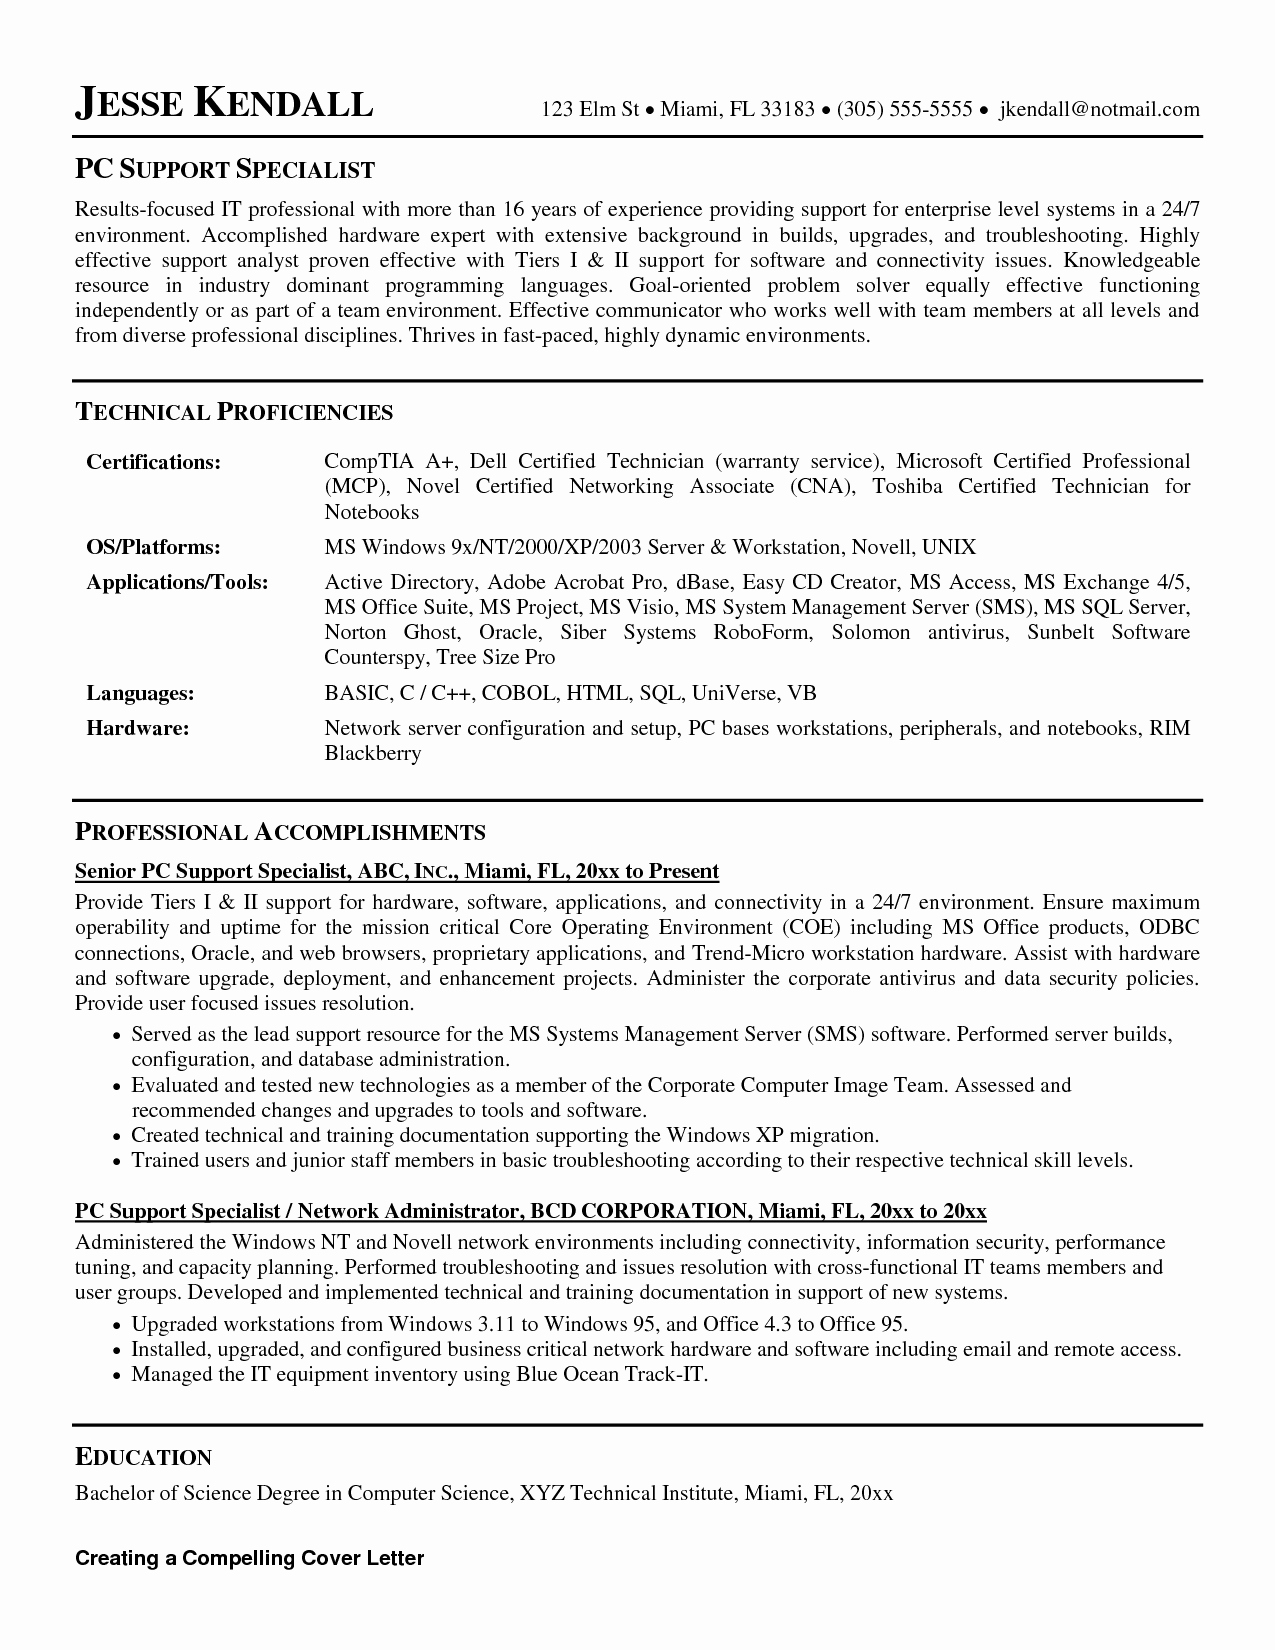 Technical Support Specialist Resume Sample